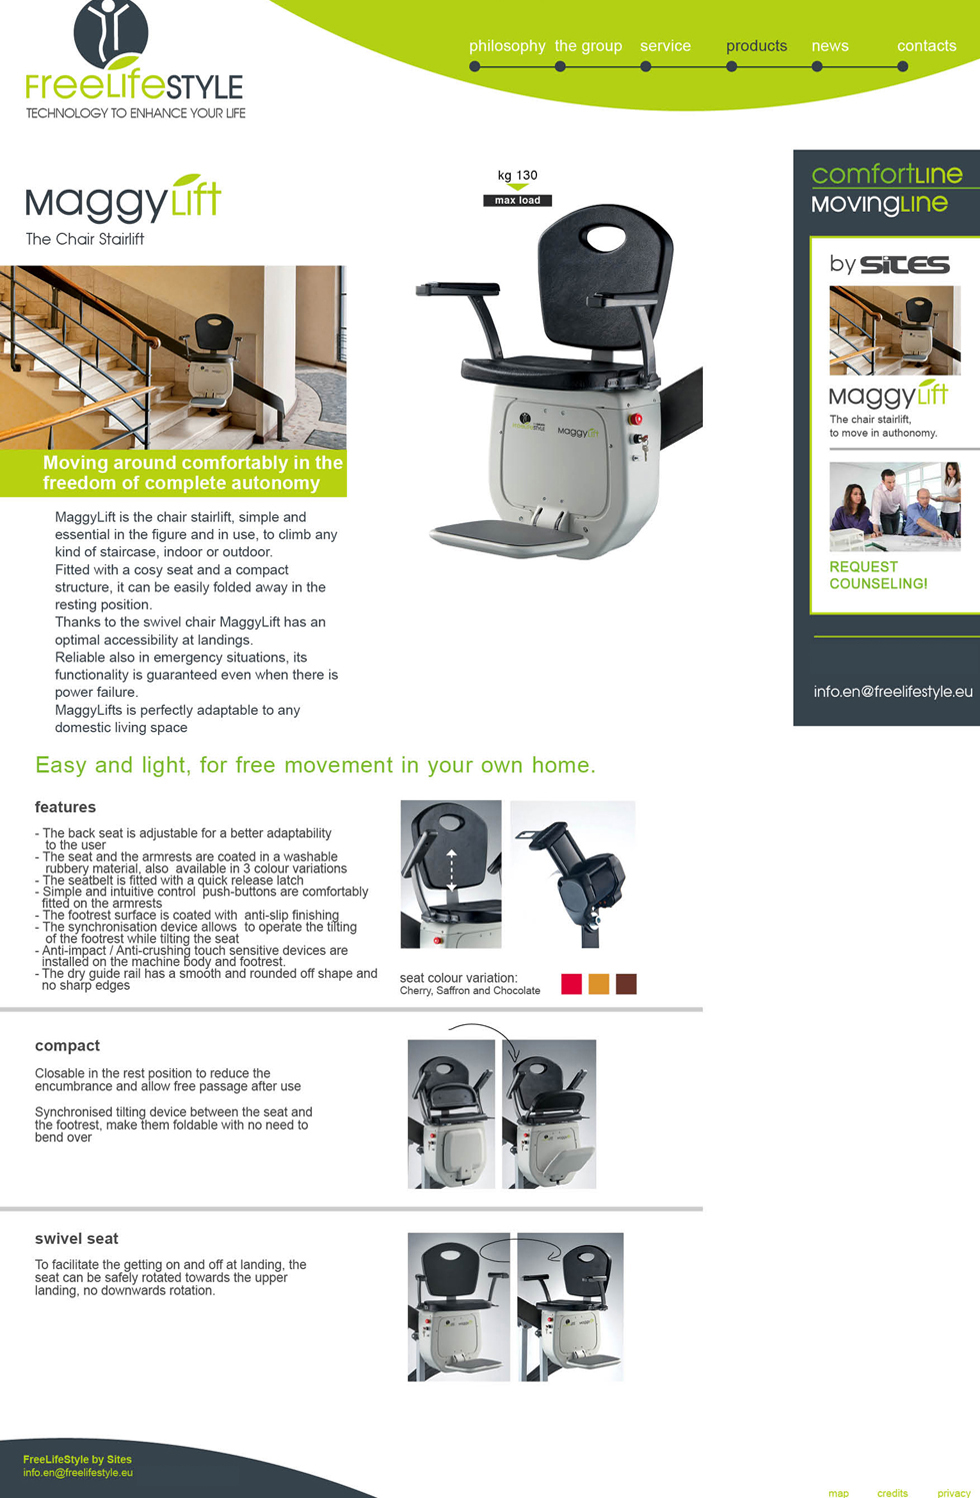 Maggy Lift, the large chair stairlift